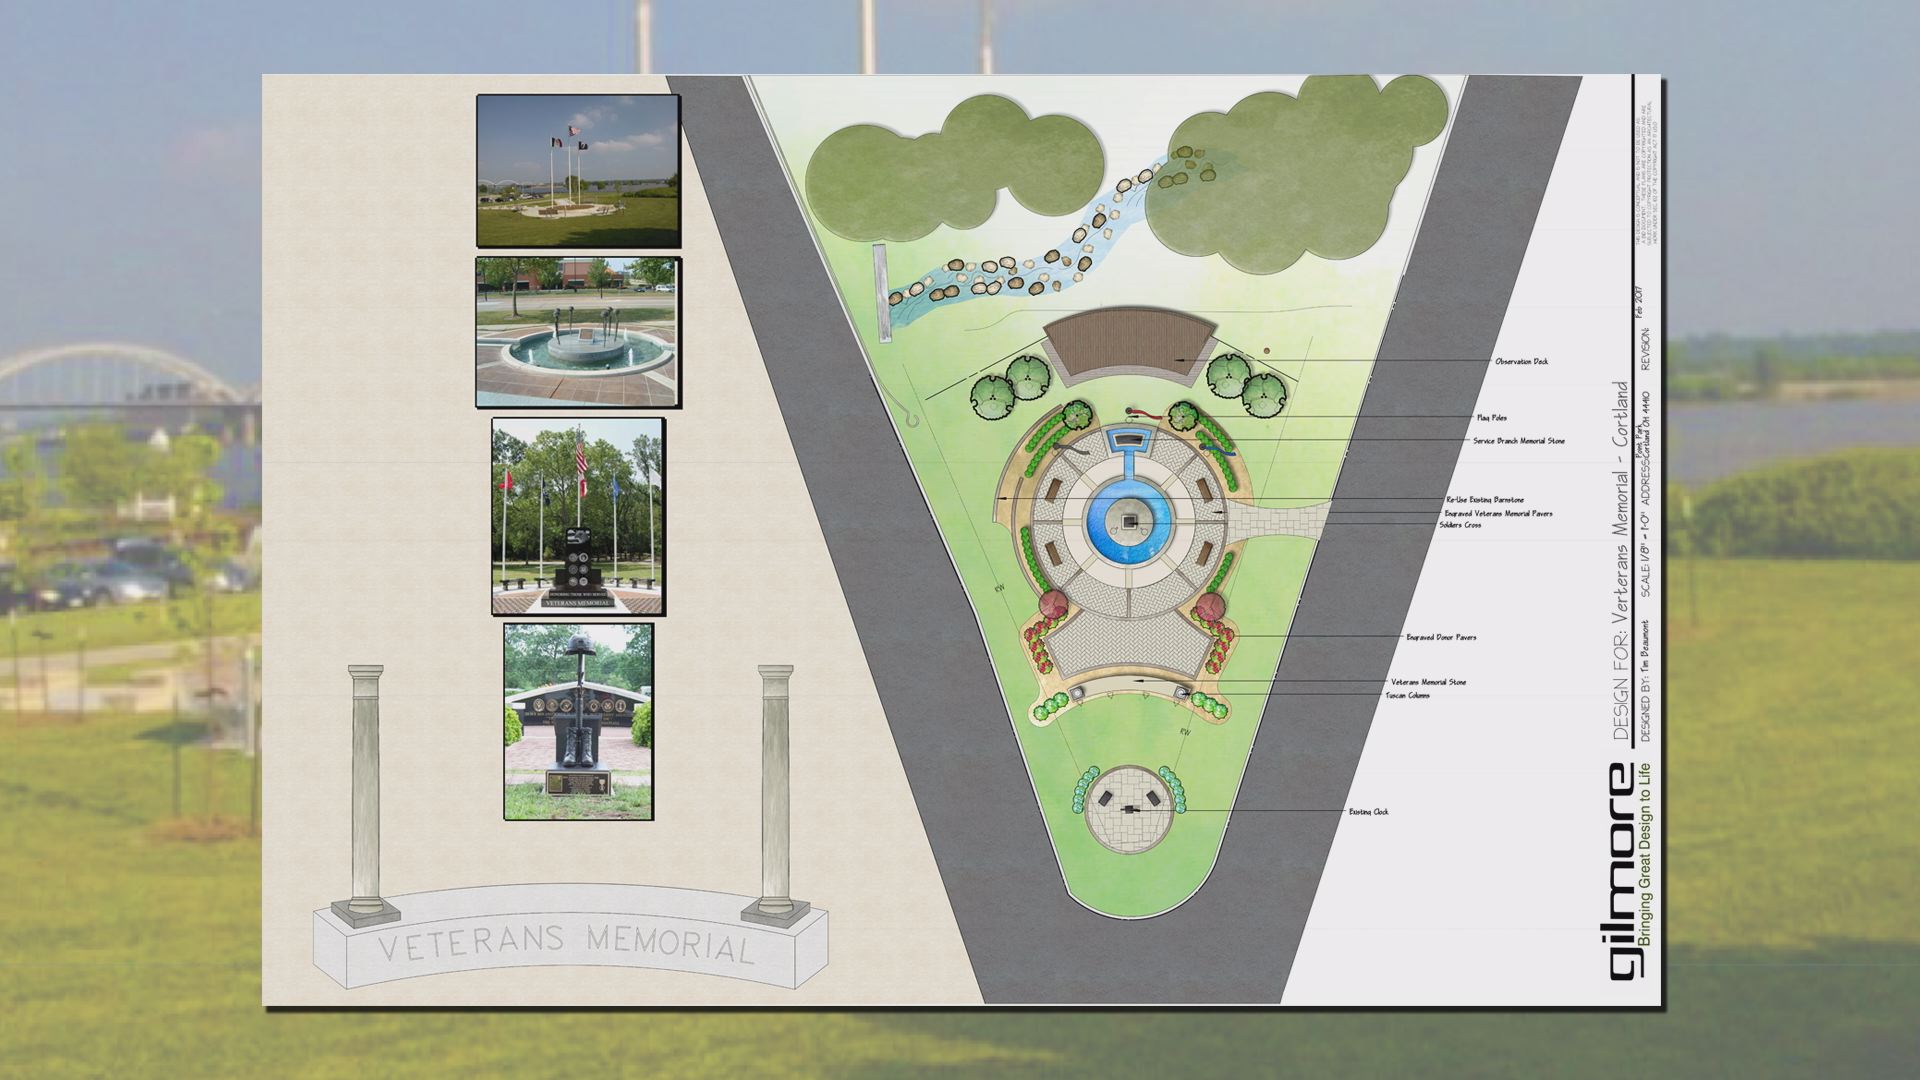 Plans in motion for new veterans memorial in Cortland - WFMJ.com News weather sports ...1920 x 1080